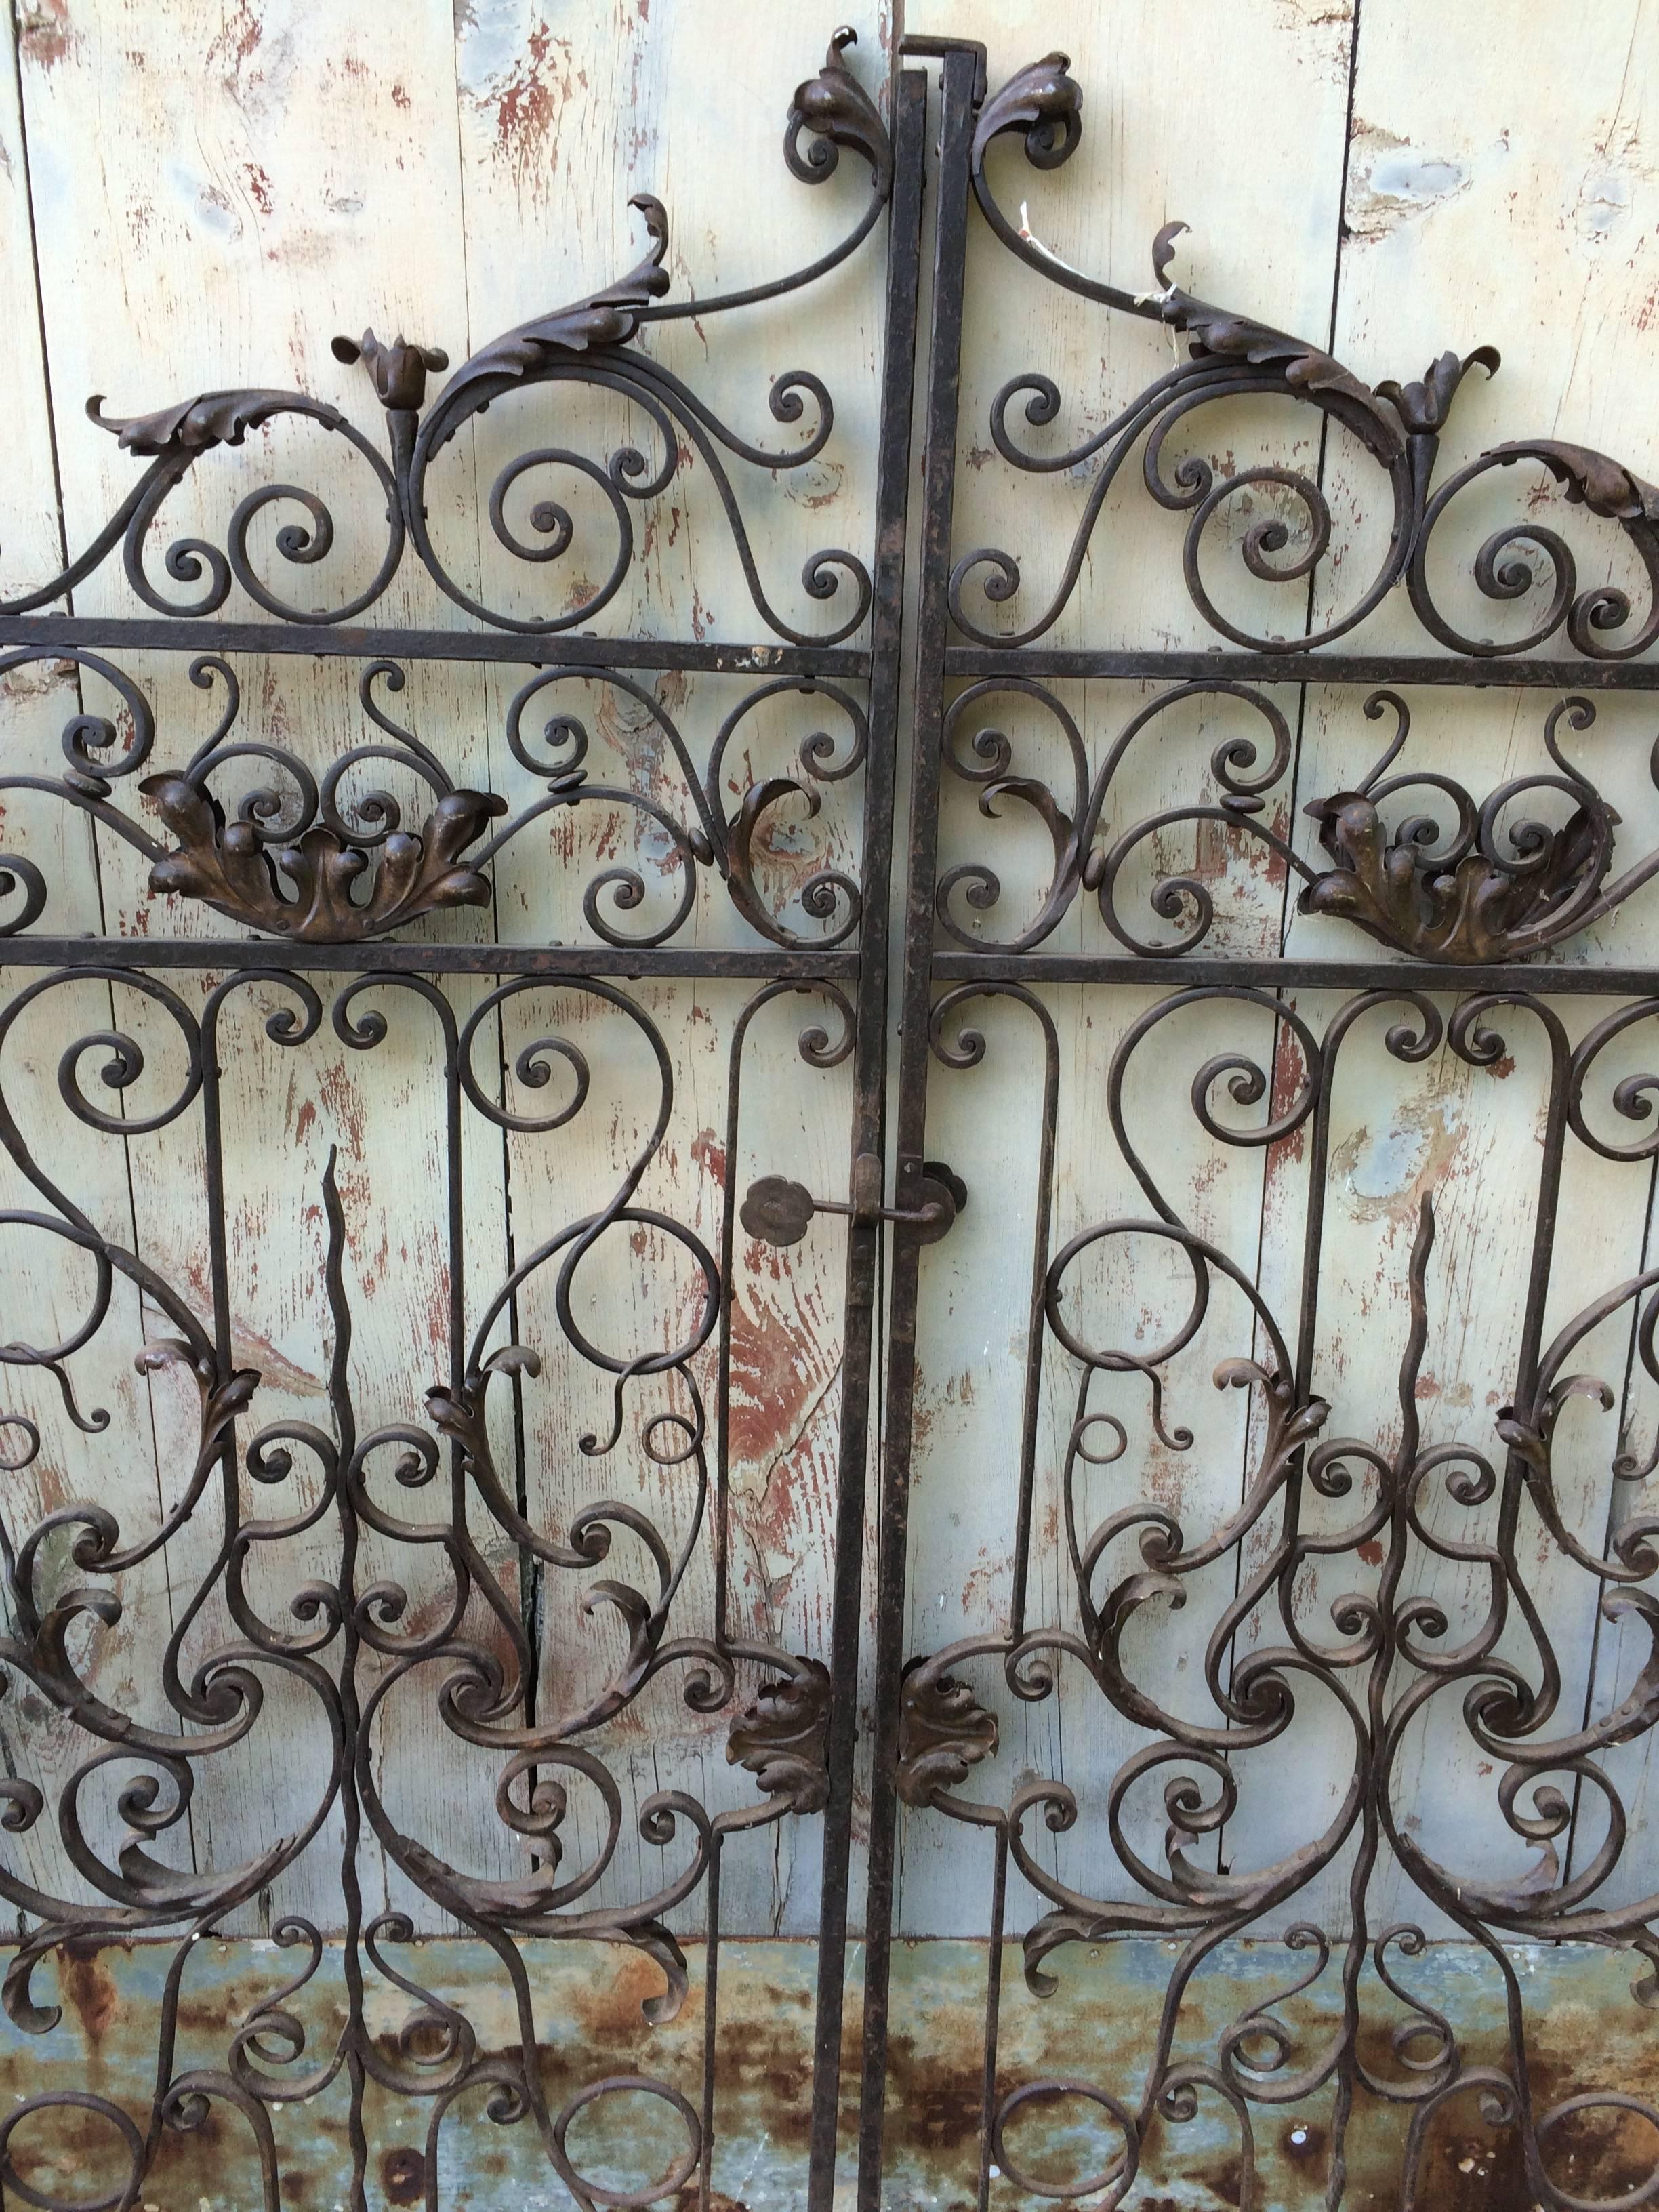 Magnificent wrought iron garden gate having two large pieces with ornate curlicue design and two smaller pieces on each side. A rare find. Would make an amazing architectural headboard.